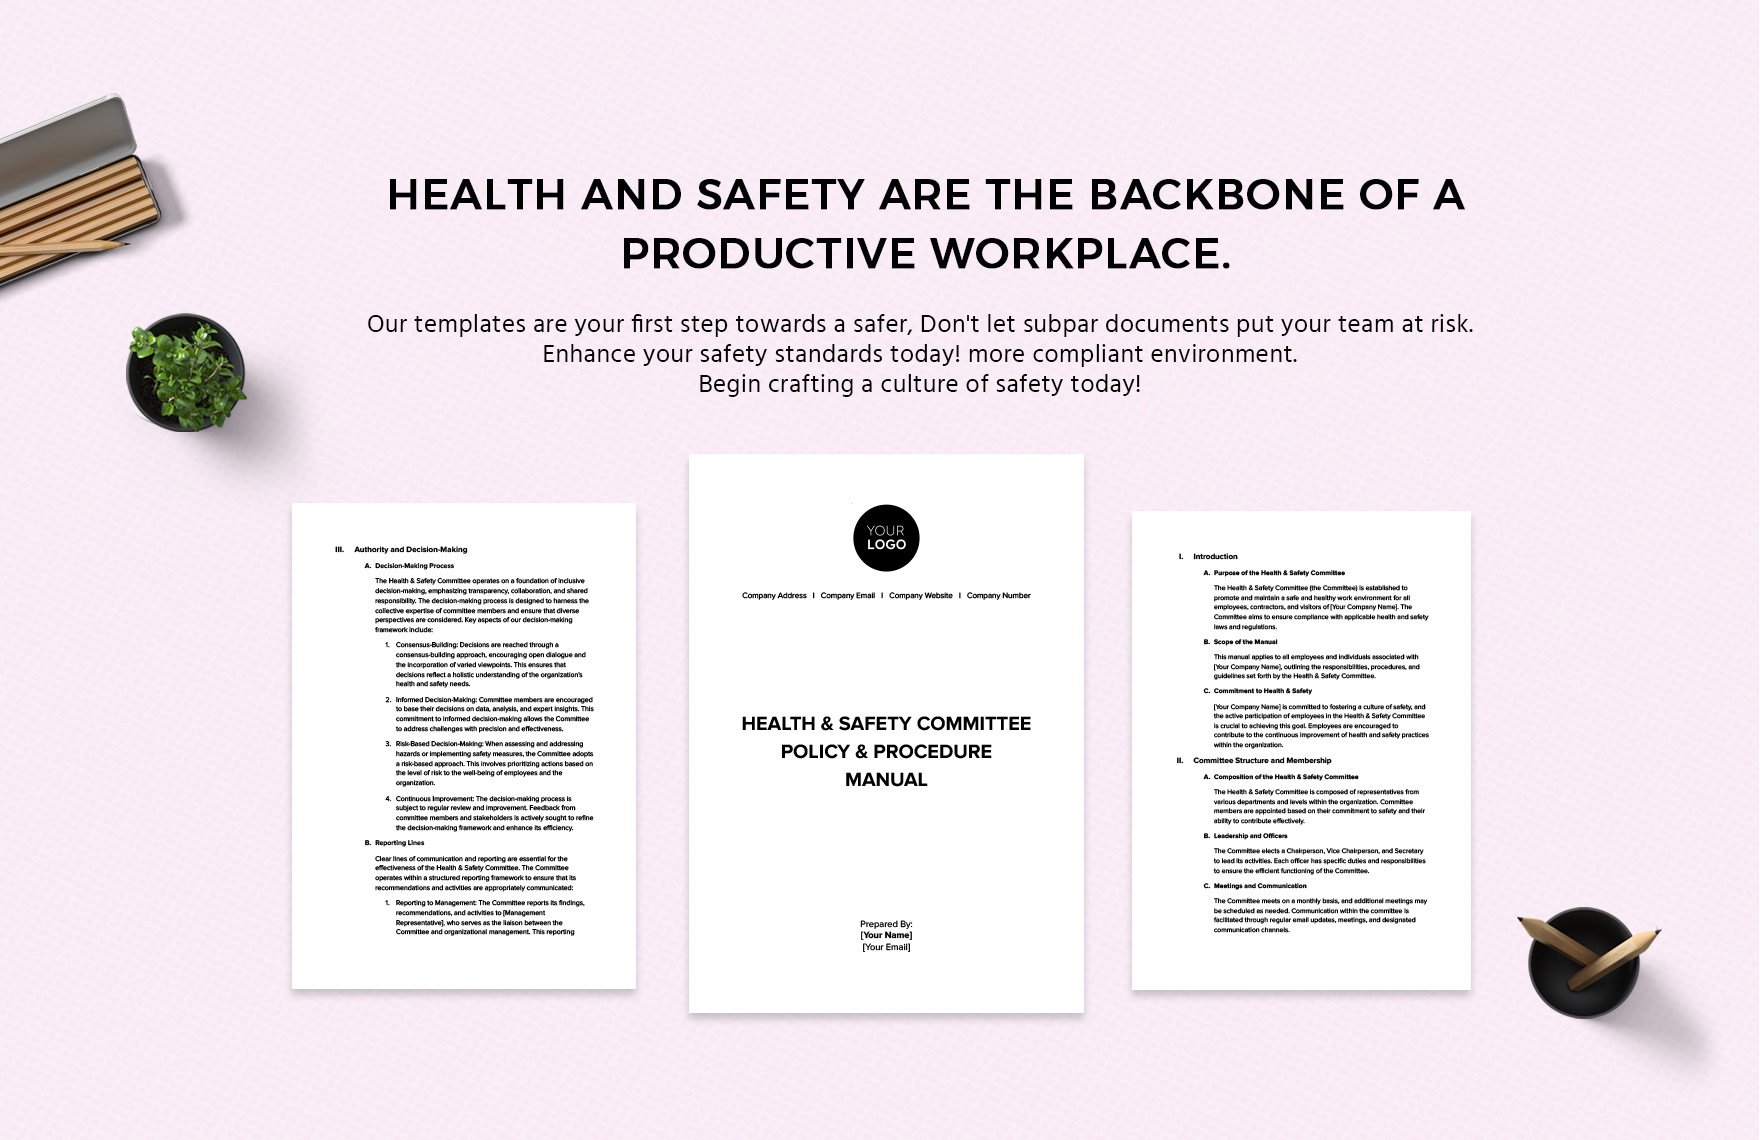 Health & Safety Committee Policy & Procedure Manual Template